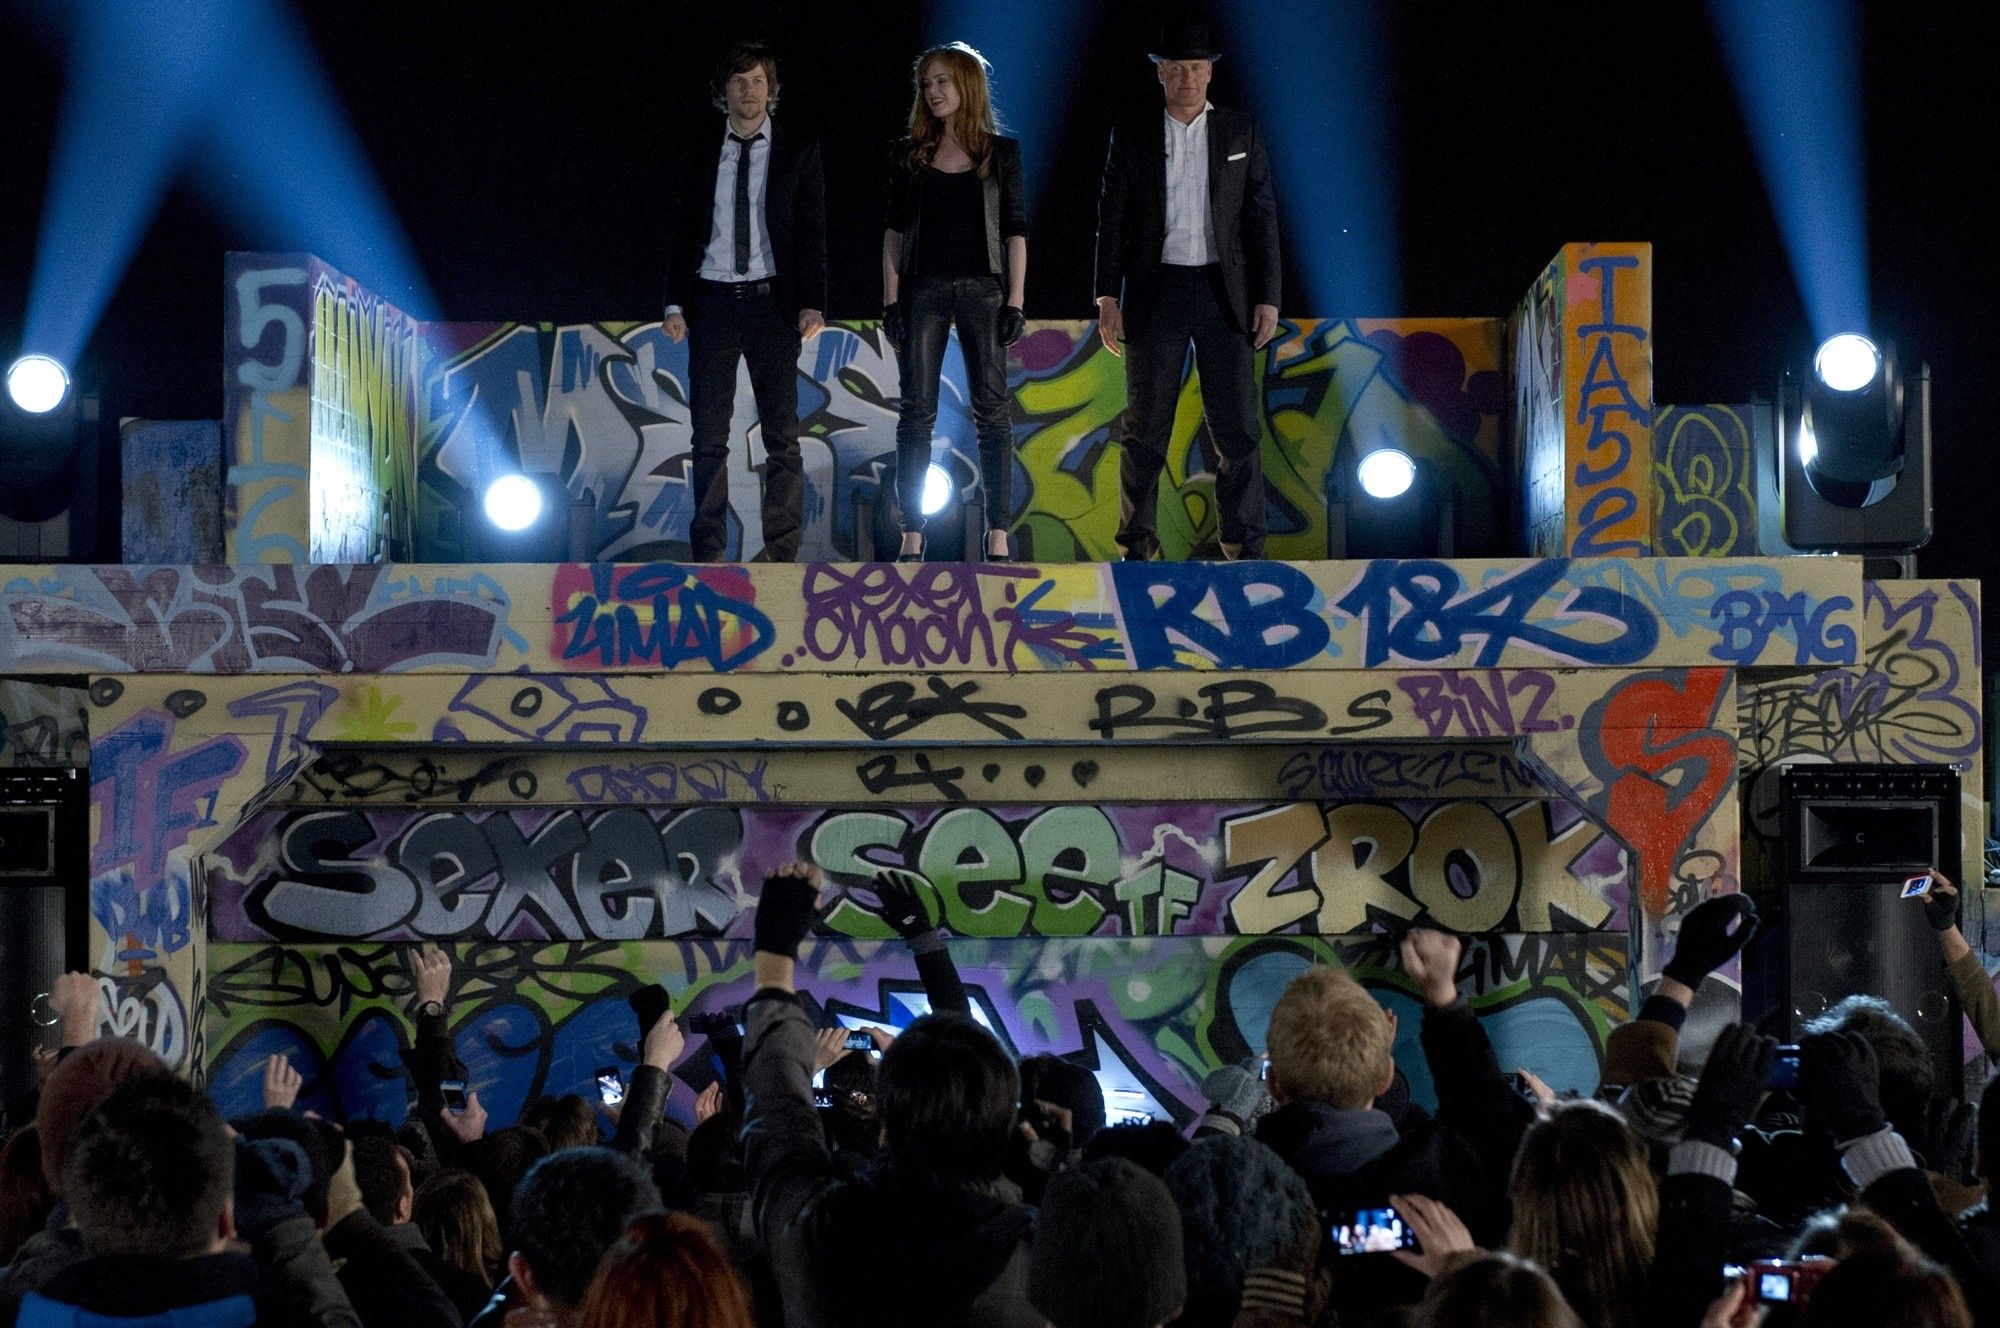 Jesse Eisenberg, Isla Fisher and Woody Harrelson in Summit Entertainment's Now You See Me (2013)